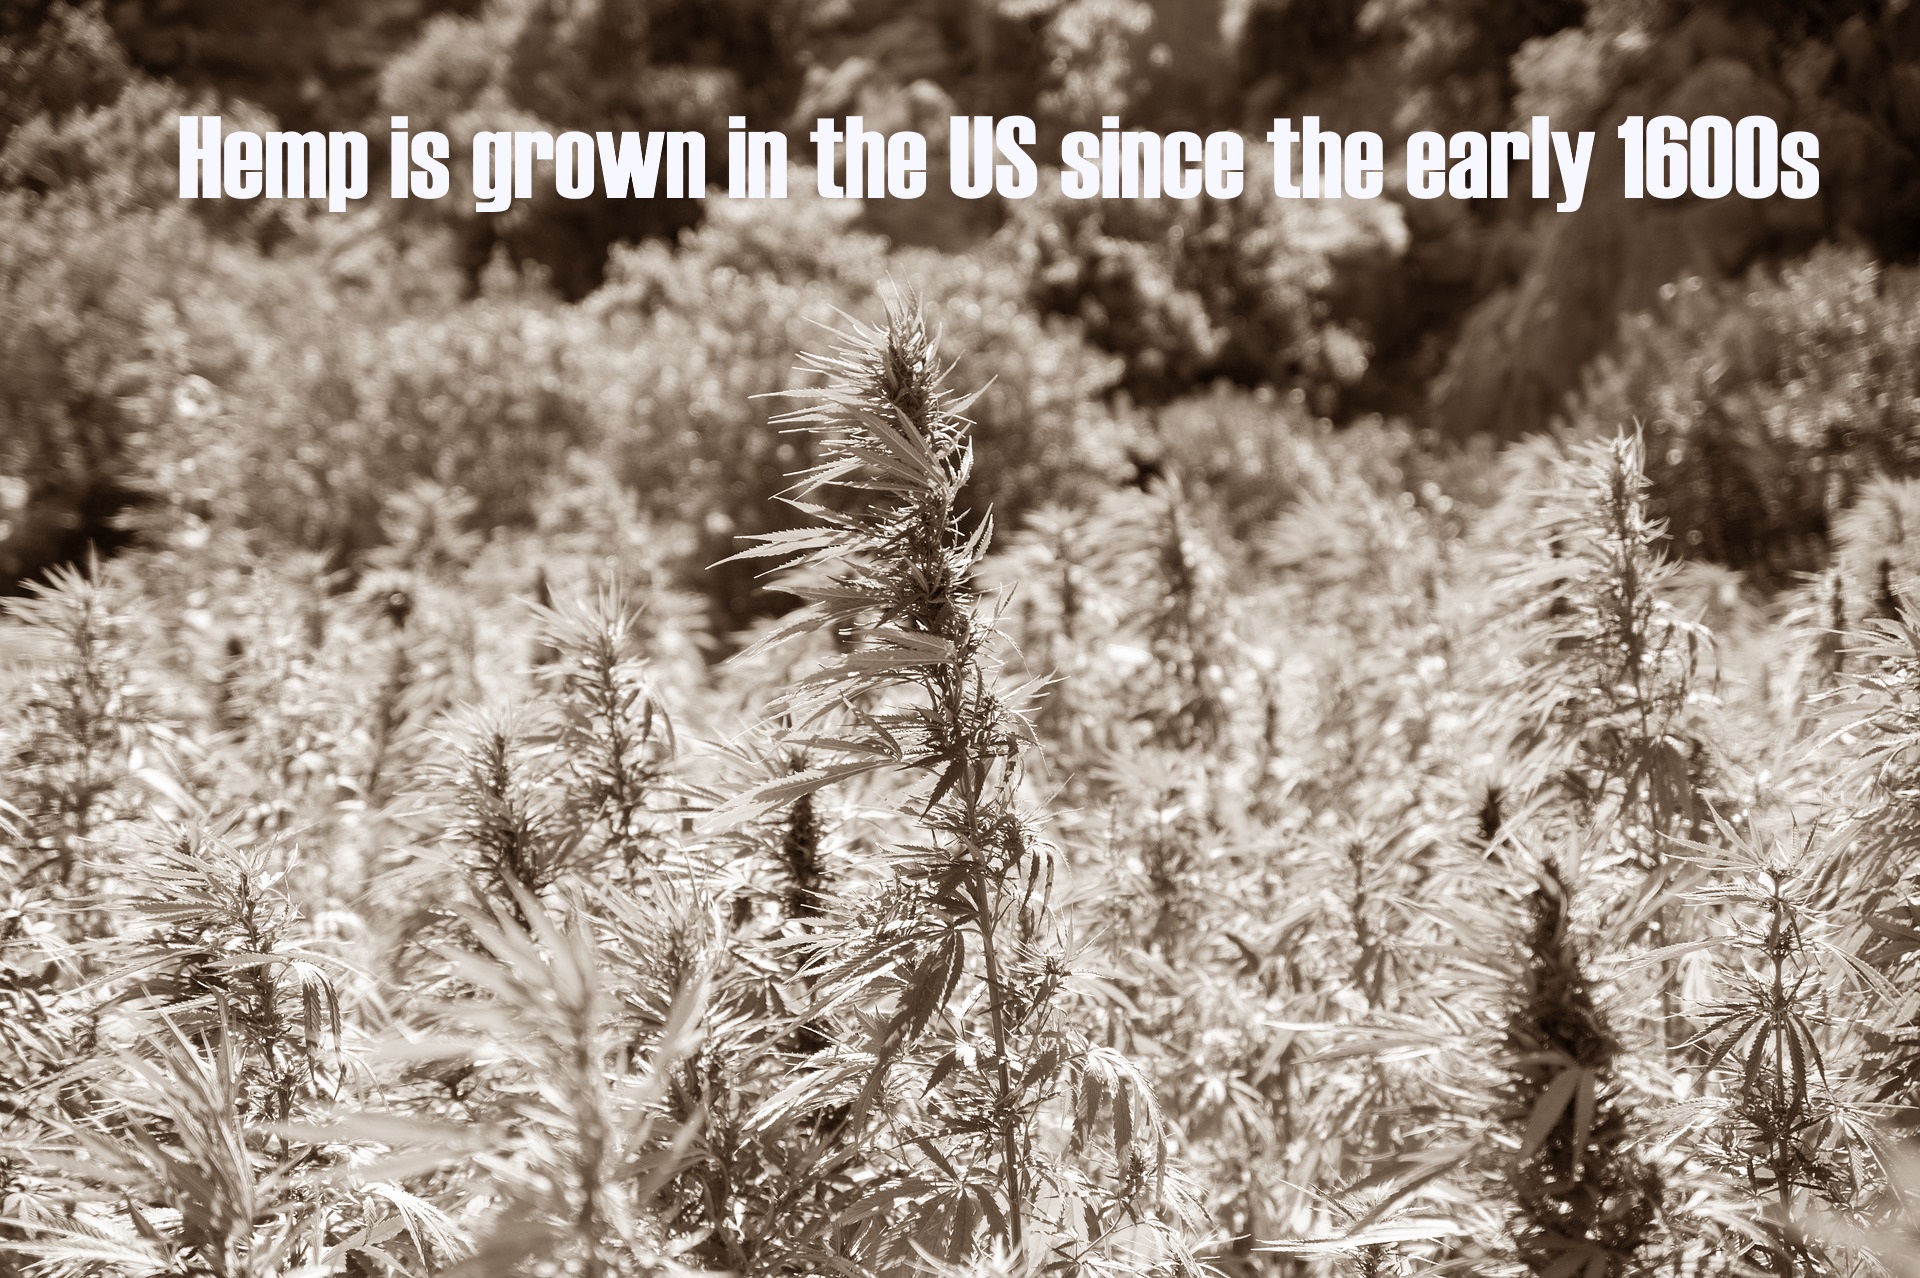 Hemp is grown in the US since the early 1600s